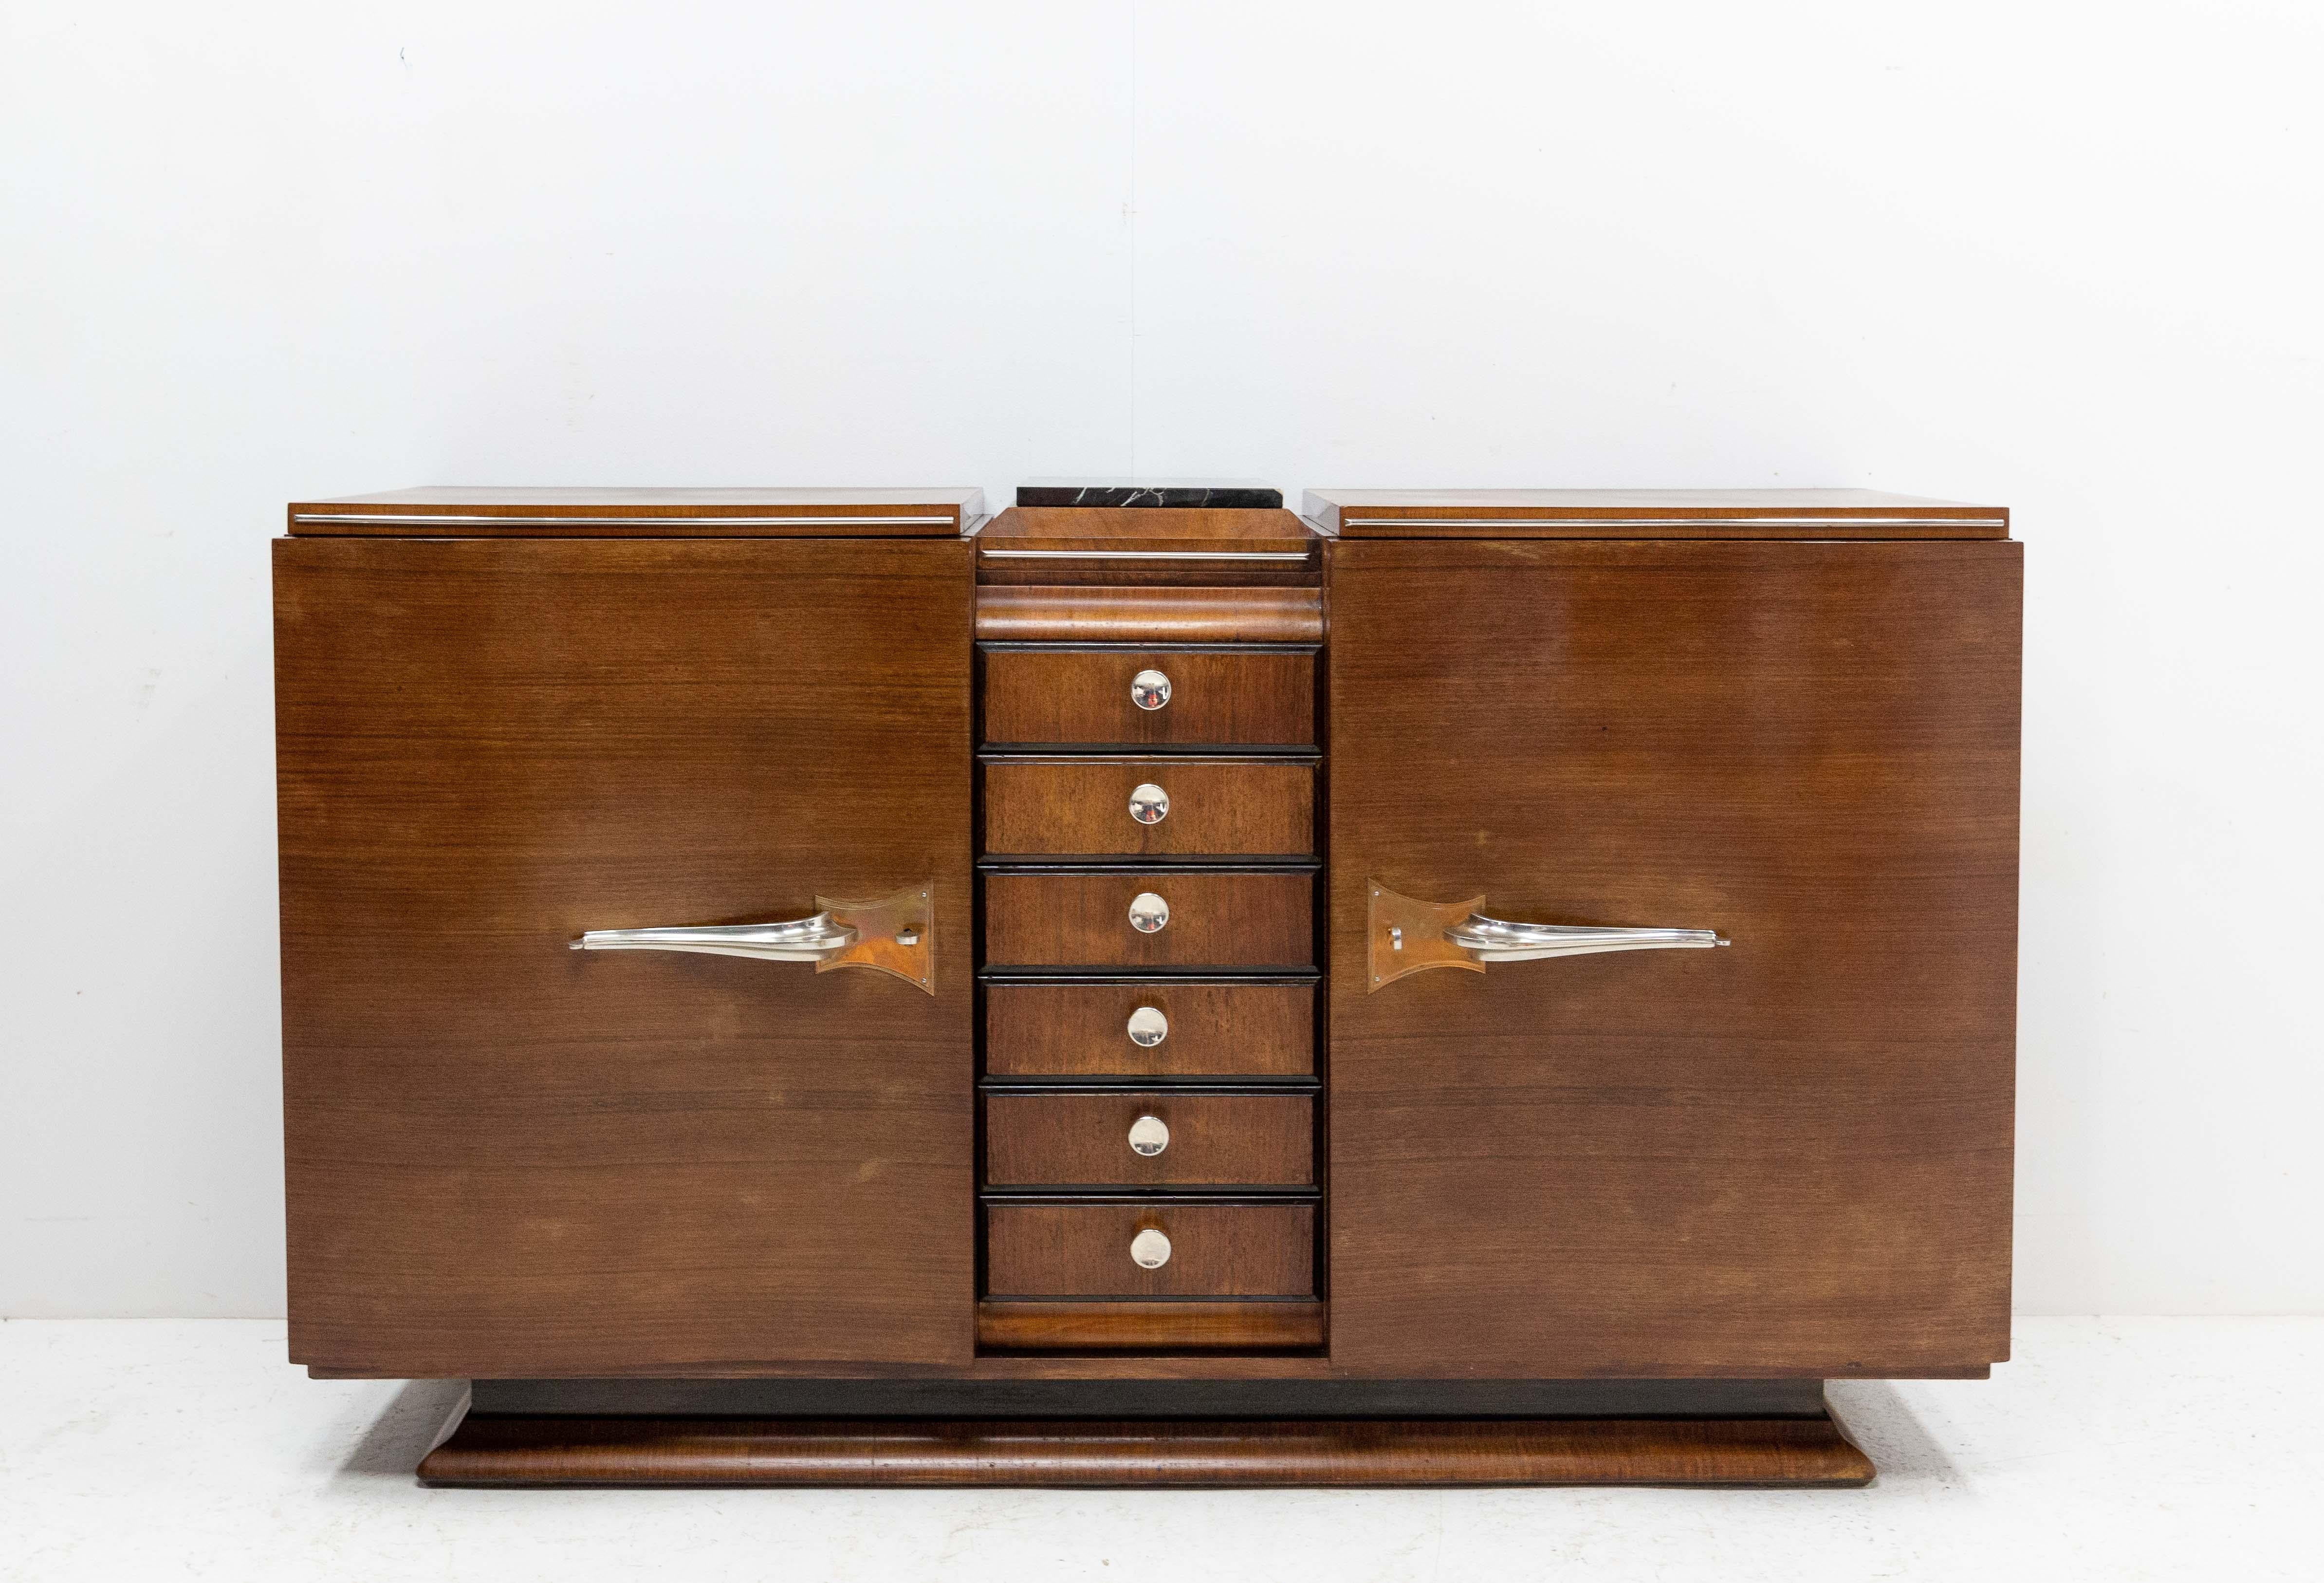 Cabinet Art Deco, French, circa 1930.
Credenza buffet walnut and marble with chrome brass chopsticks.
Two doors and six drawers.
The buffet has been made in three parts. The top of the center part is recovered of black marble.
The top drawer is